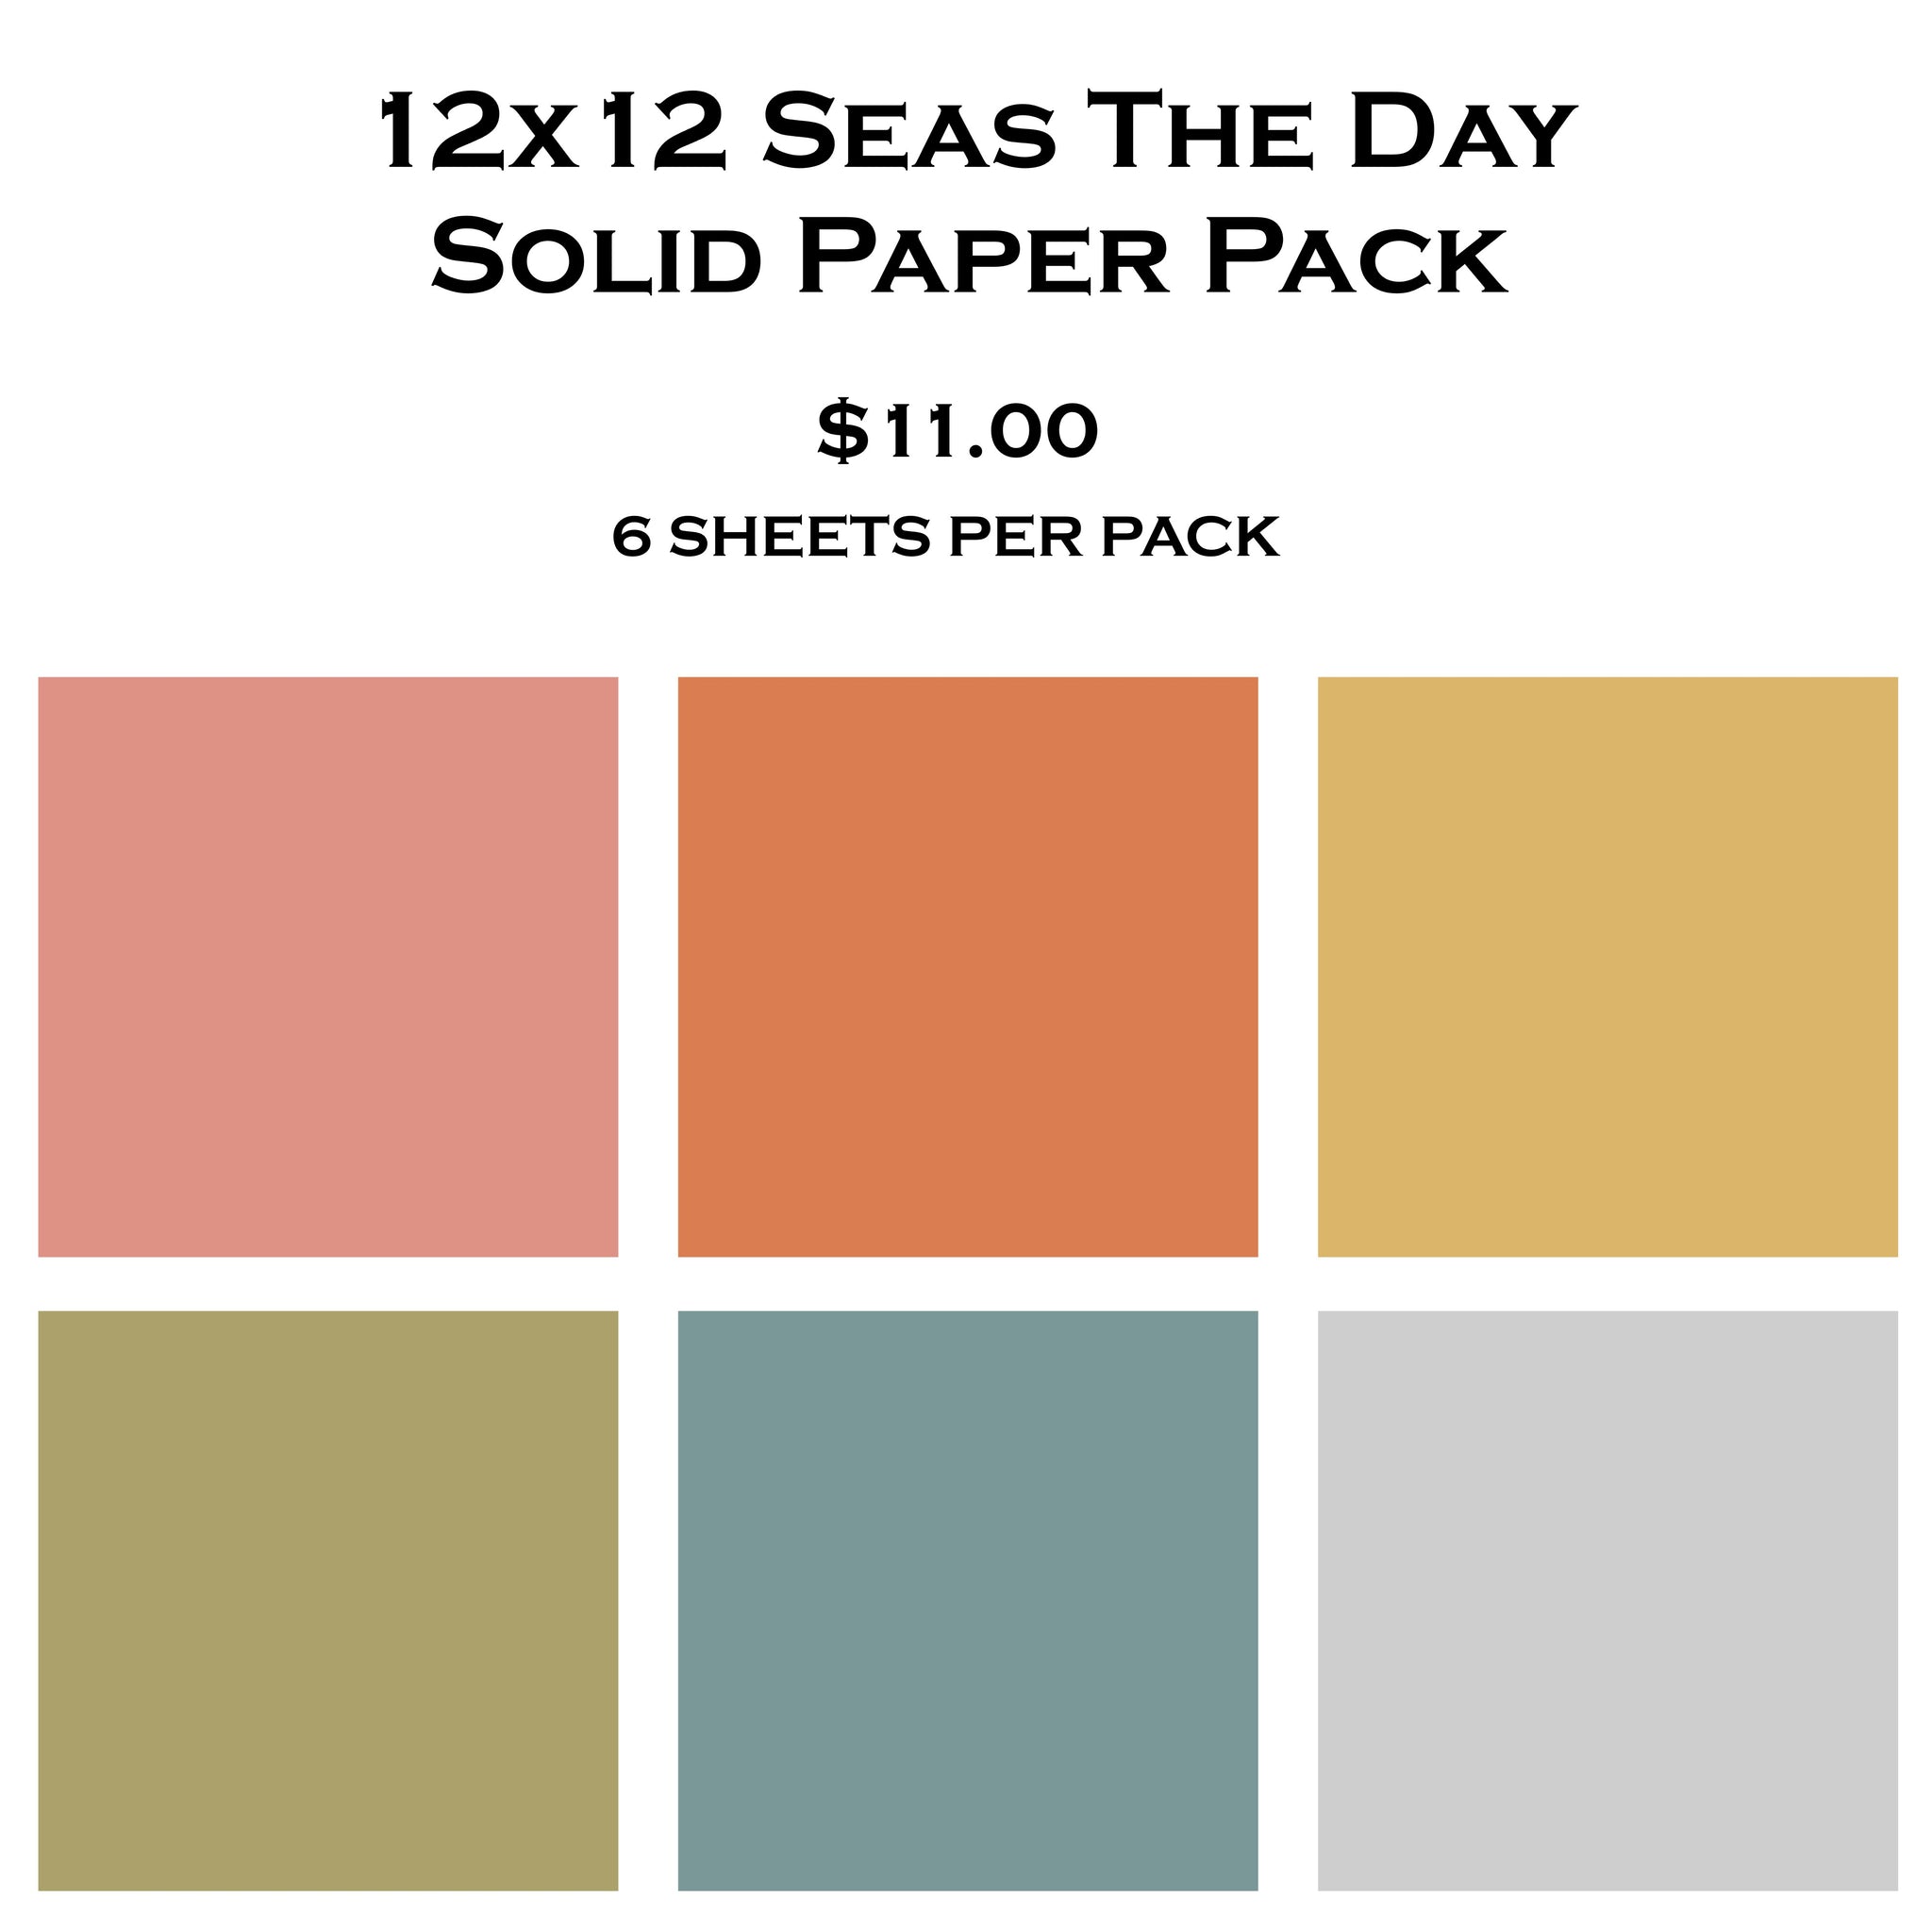 Seas The Day 12x12 Solid Paper Pack